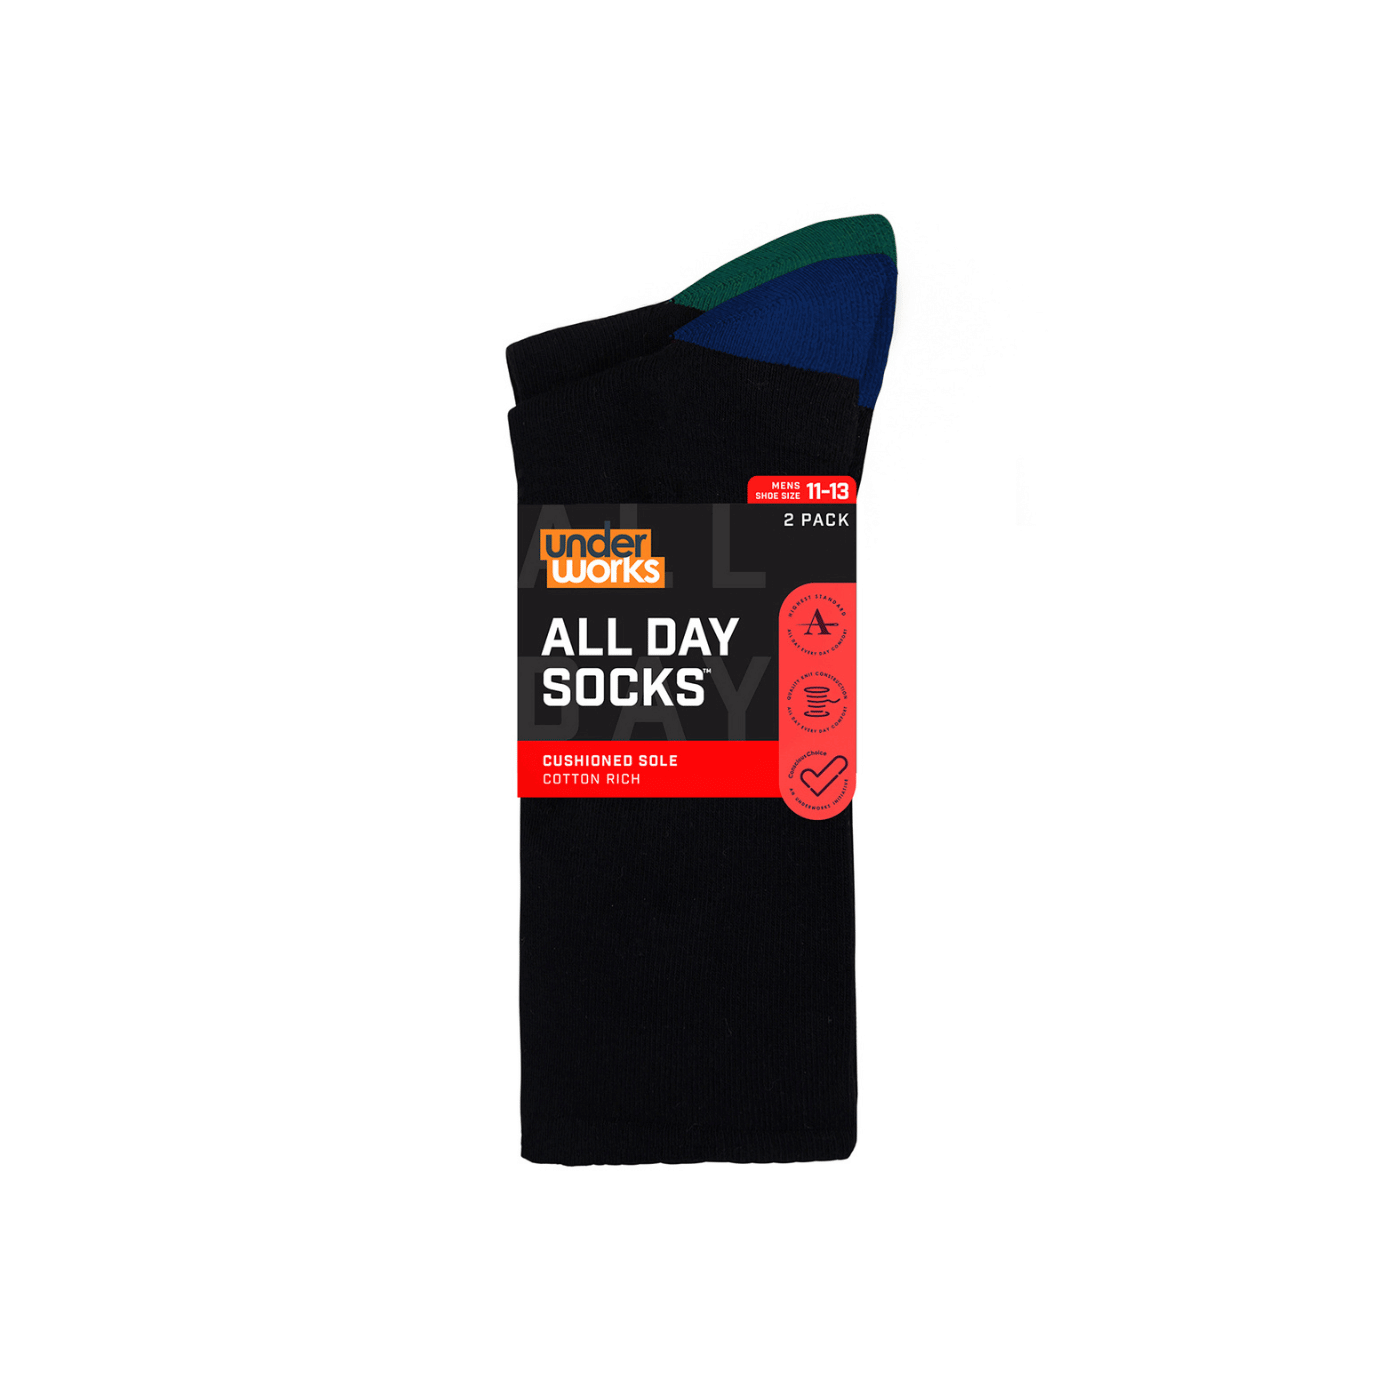 All Day Socks Men's Cushion Crew with Colour Heel and Toe 2pk